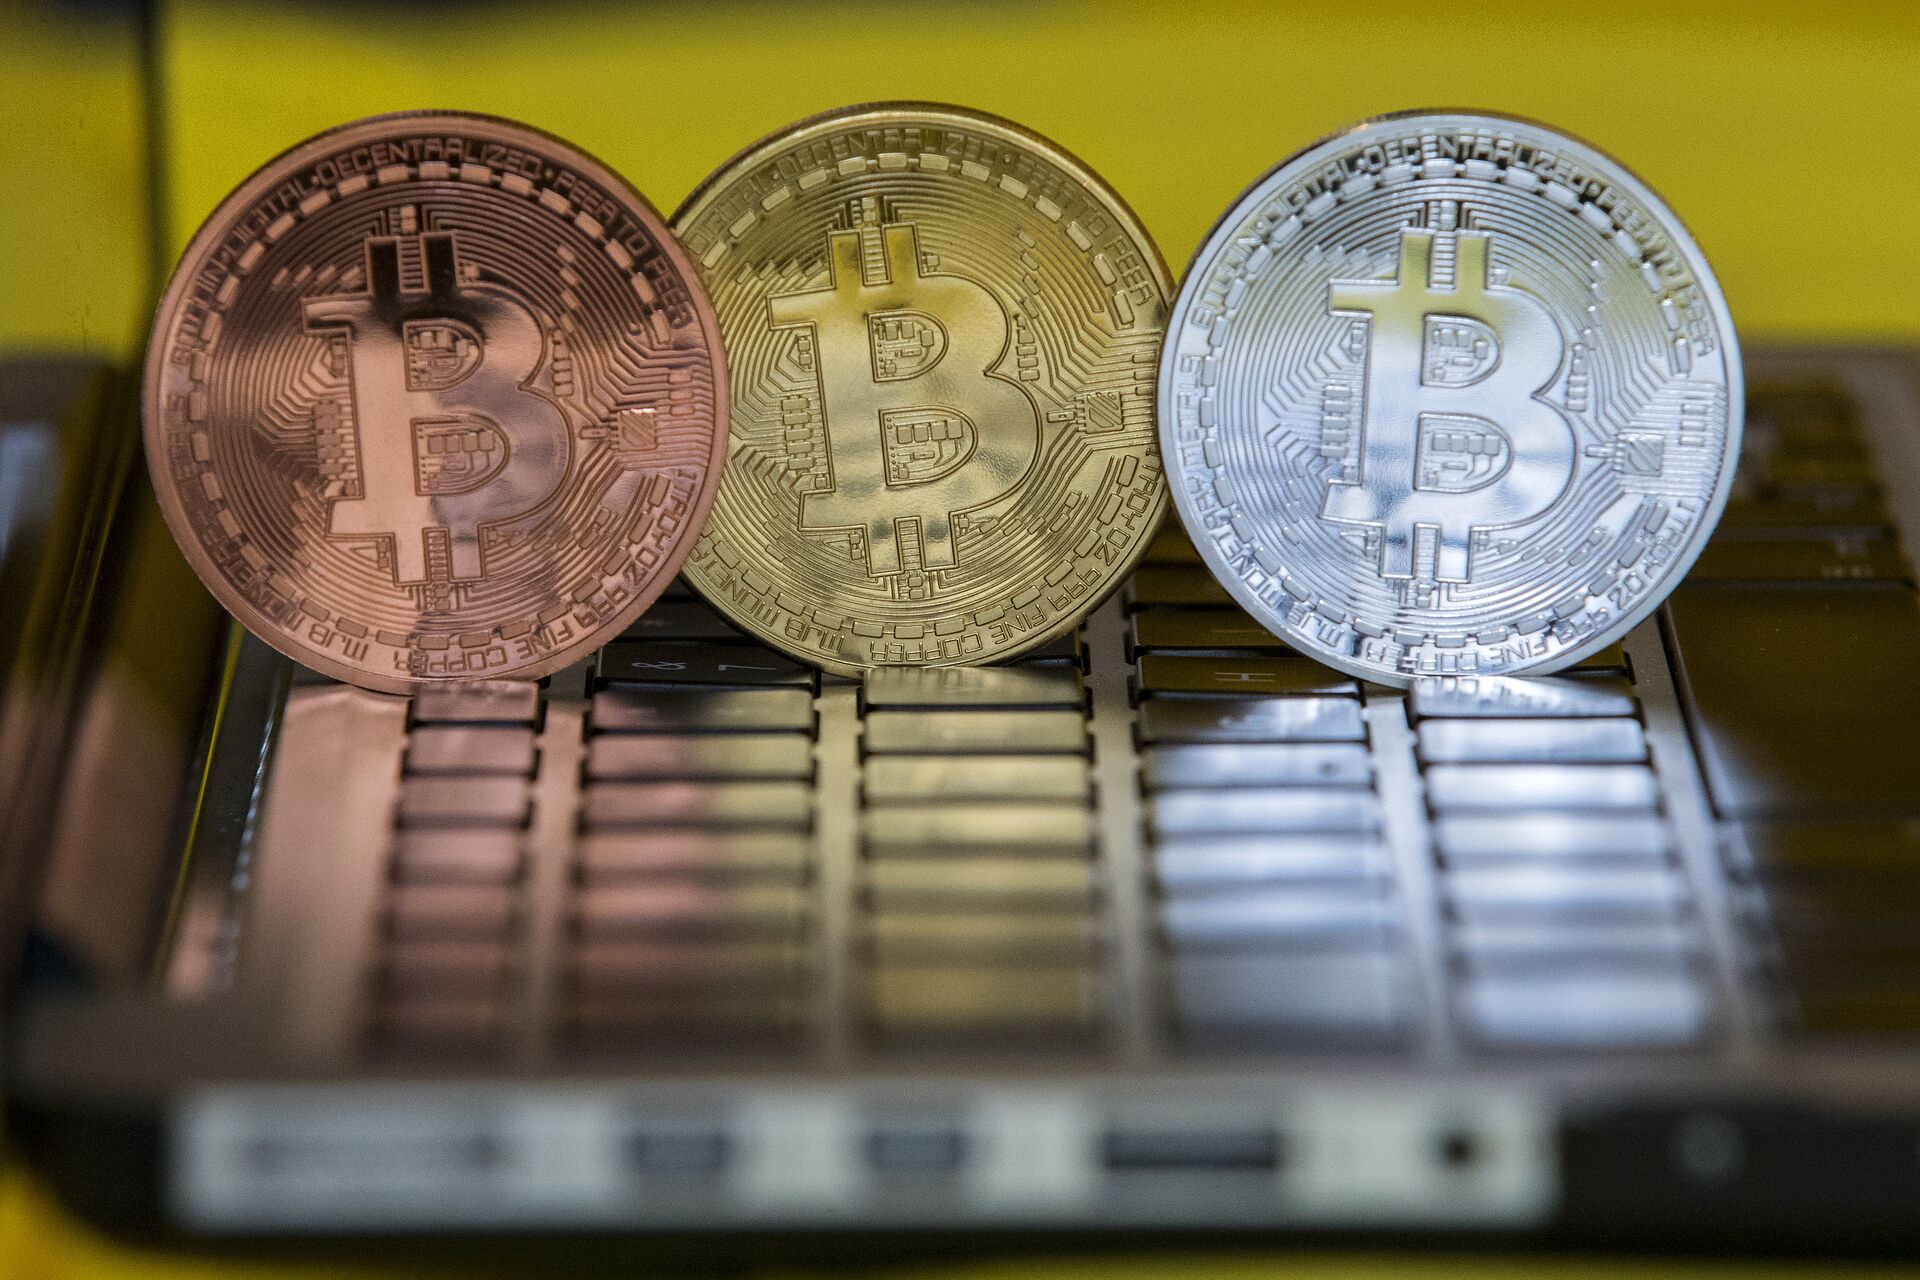 A picture taken on February 6, 2018 shows a visual representation of the digital crypto-currency Bitcoin, at the Bitcoin Change shop in the Israeli city of Tel Aviv - Sputnik Brasil, 1920, 22.11.2021